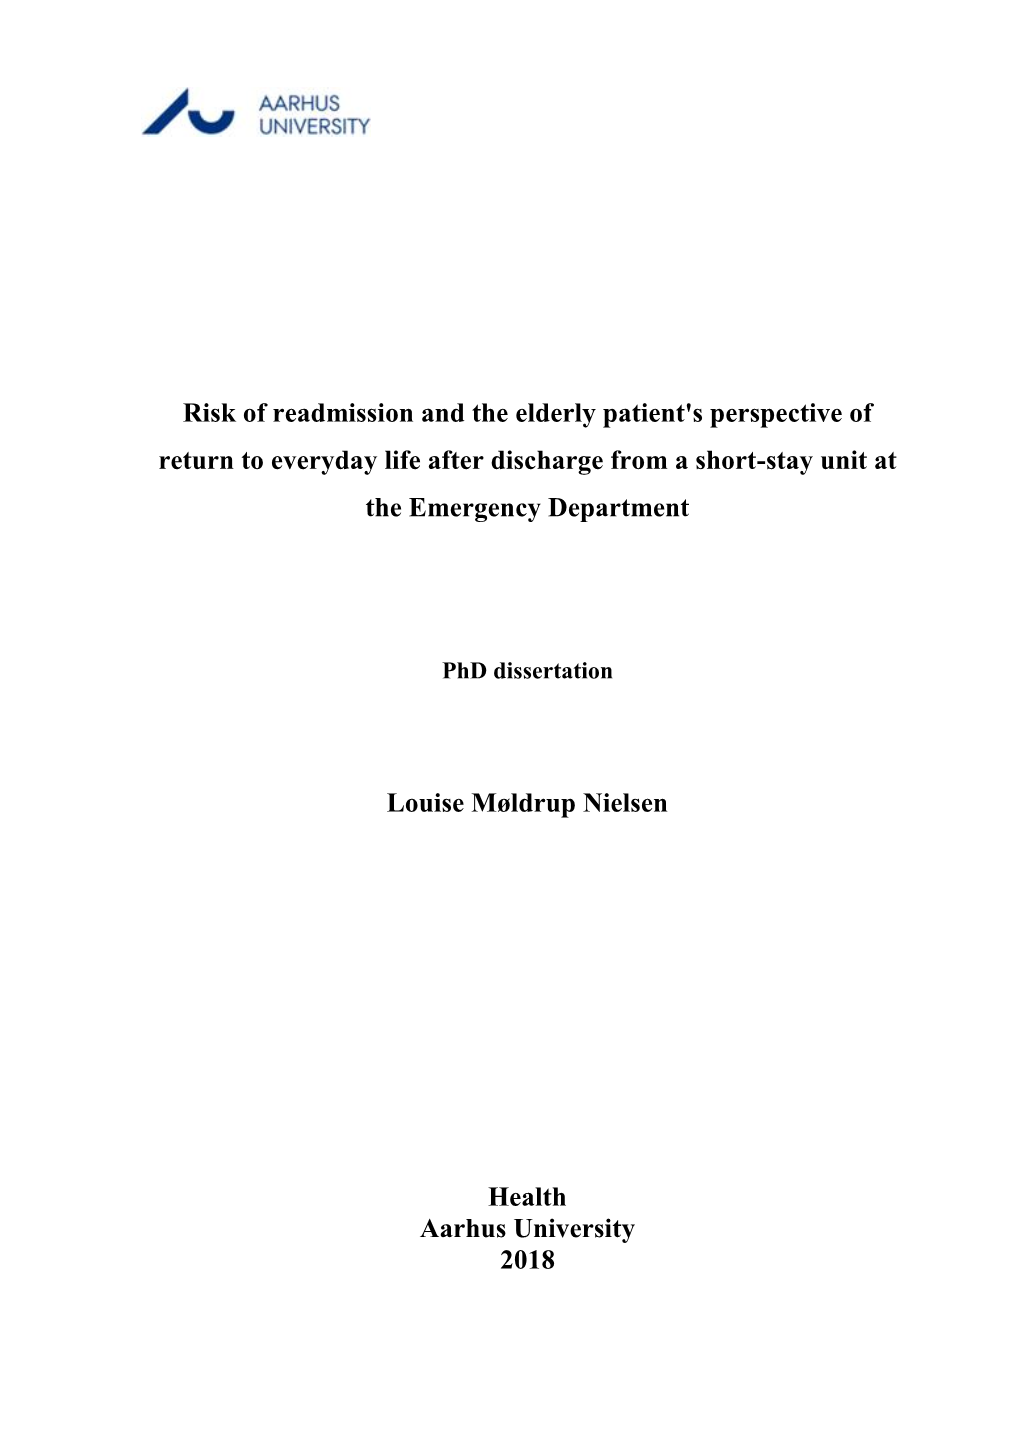 Risk of Readmission and the Elderly Patient's Perspective of Return to Everyday Life After Discharge from a Short-Stay Unit at the Emergency Department